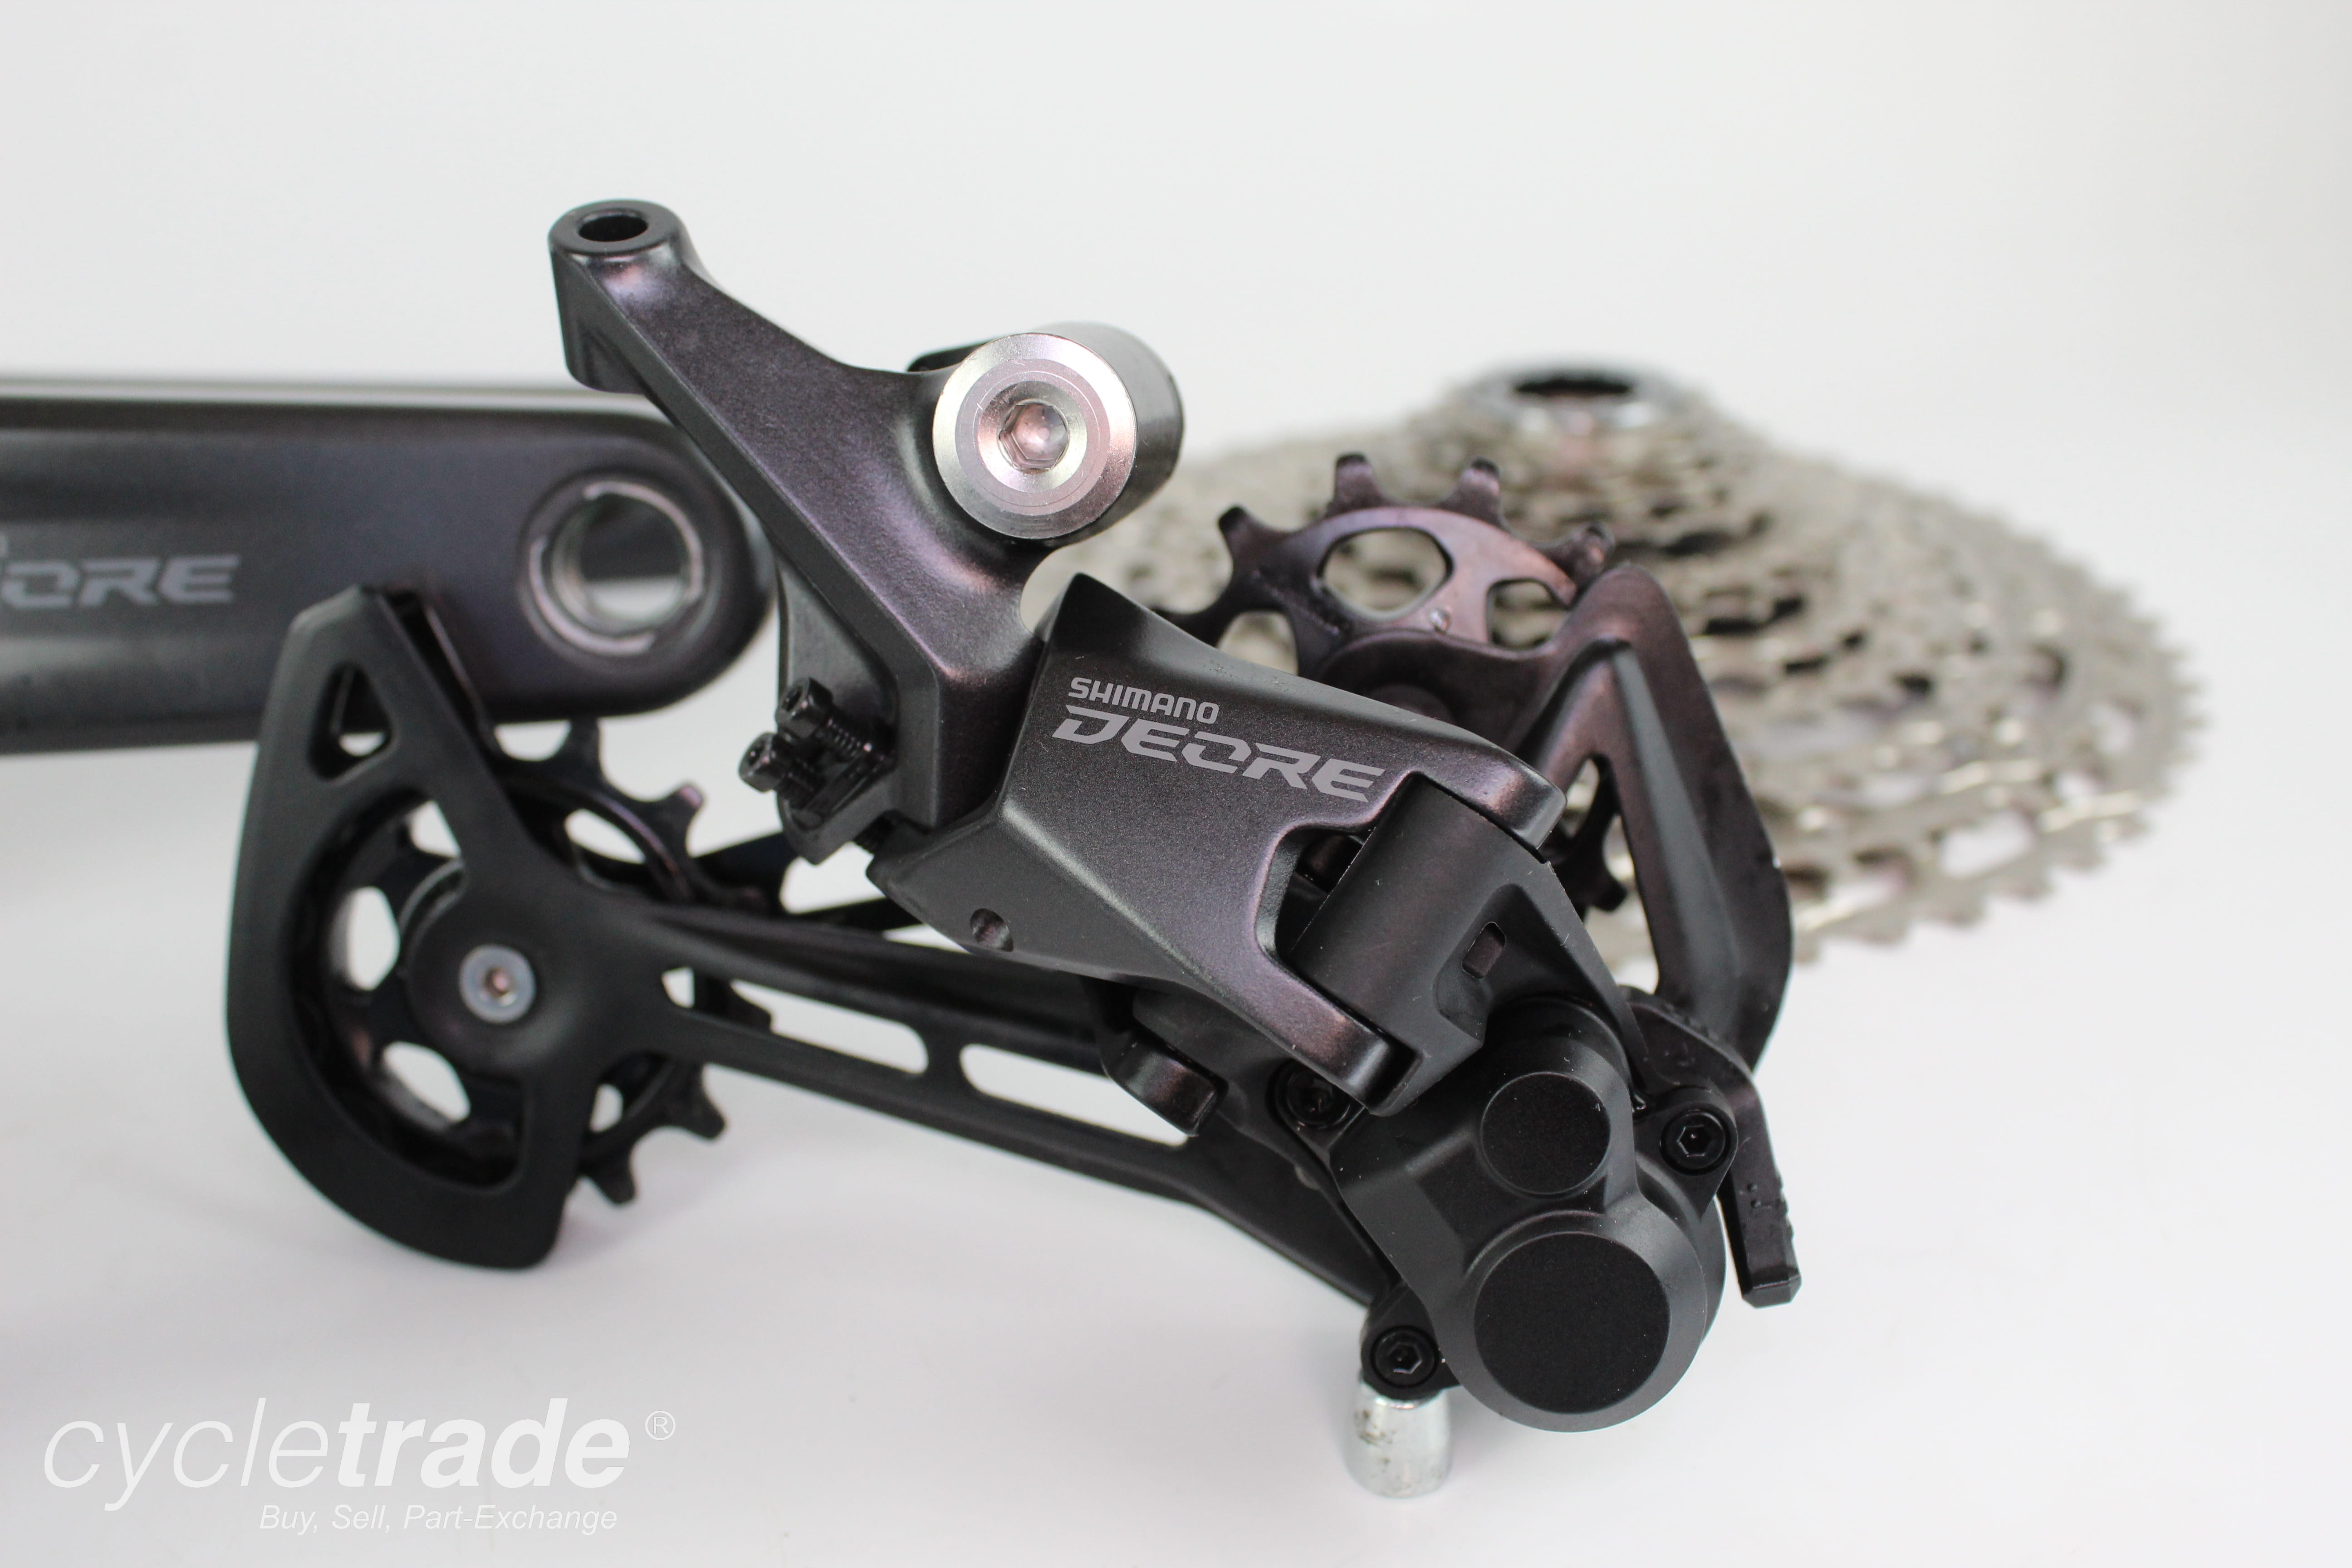 Full Groupset- Shimano Deore 11x1 Speed M5100- Grade A